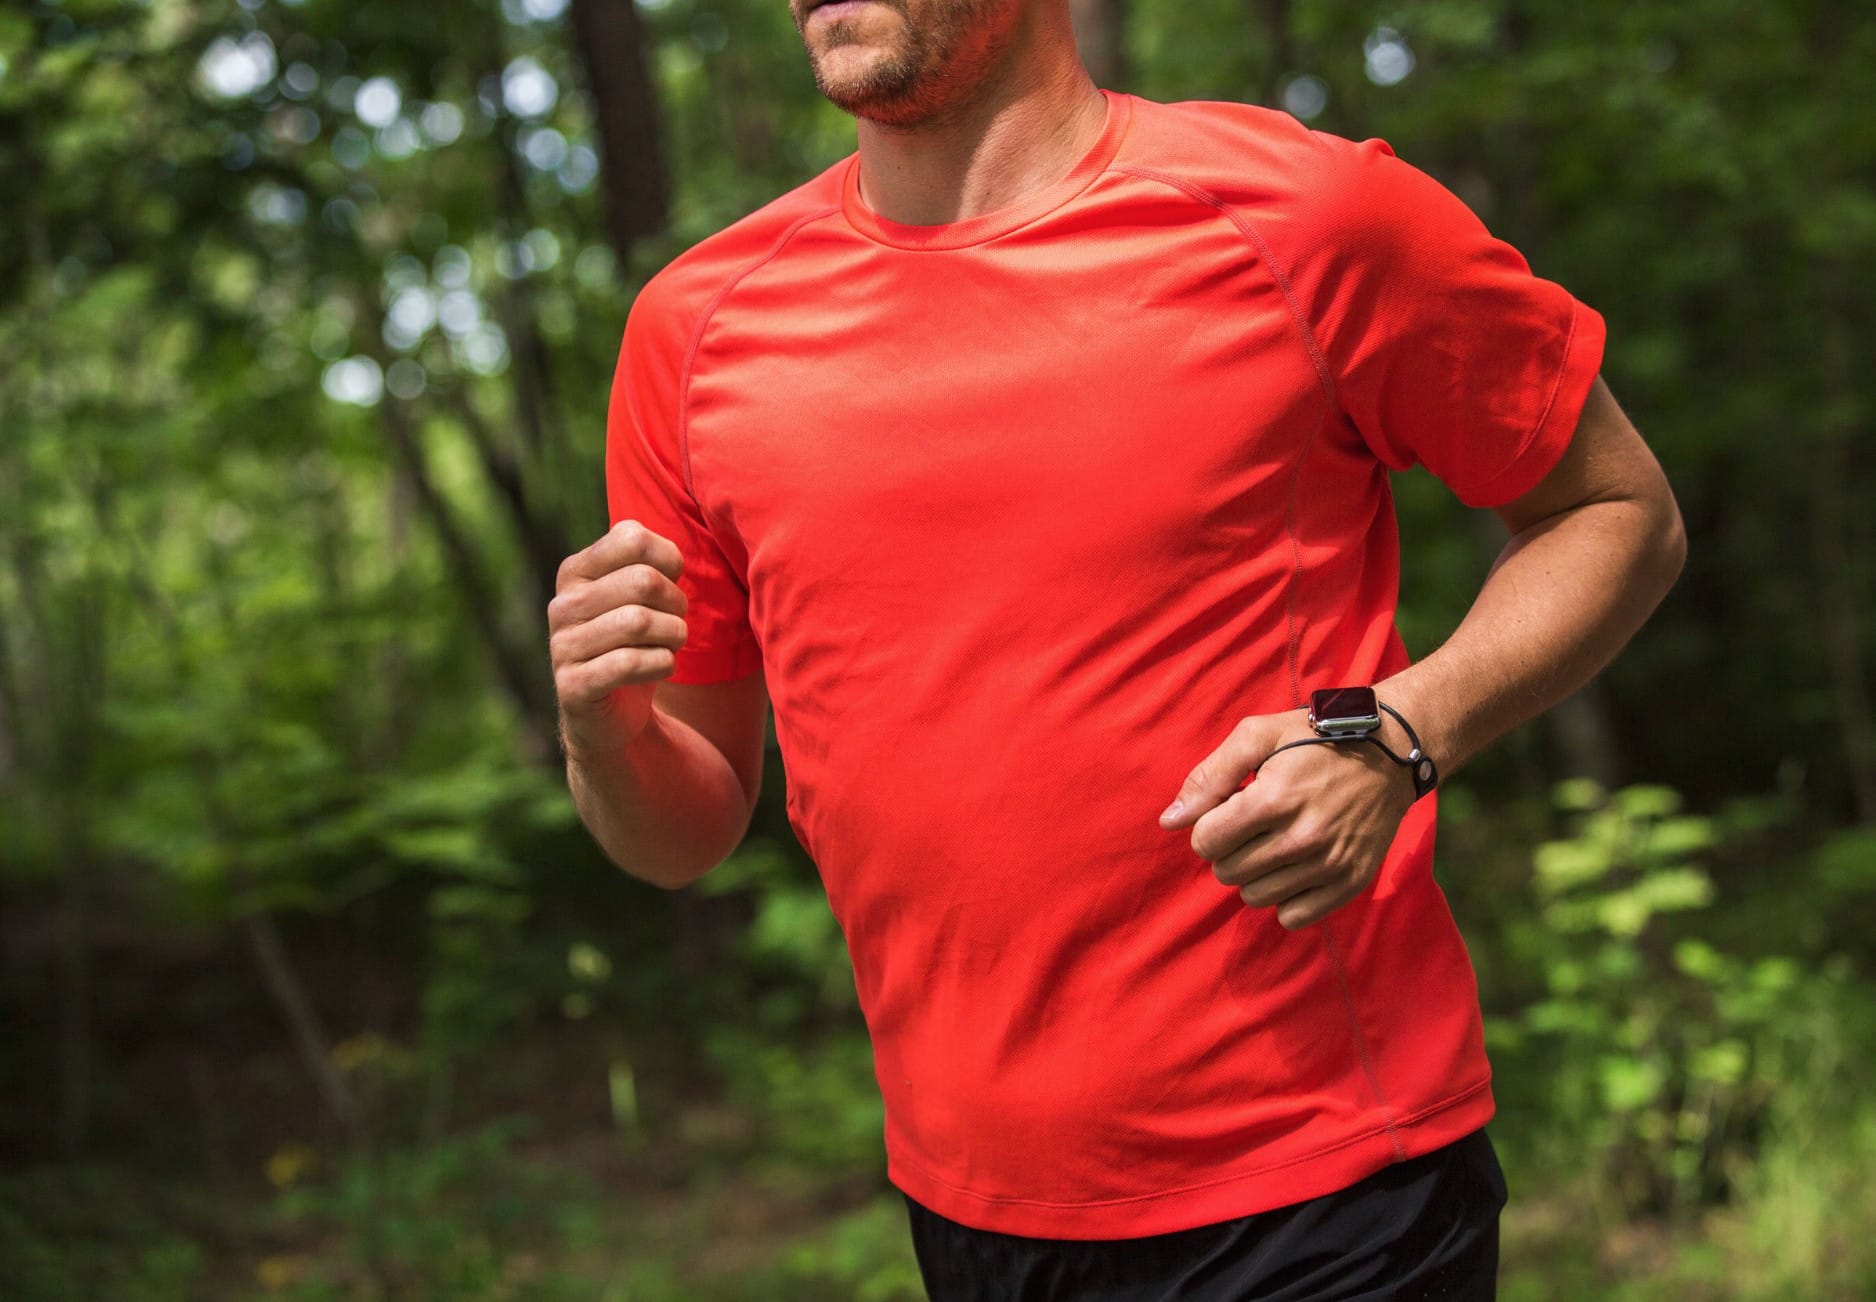 Shift is super light and stays in place throughout your run.